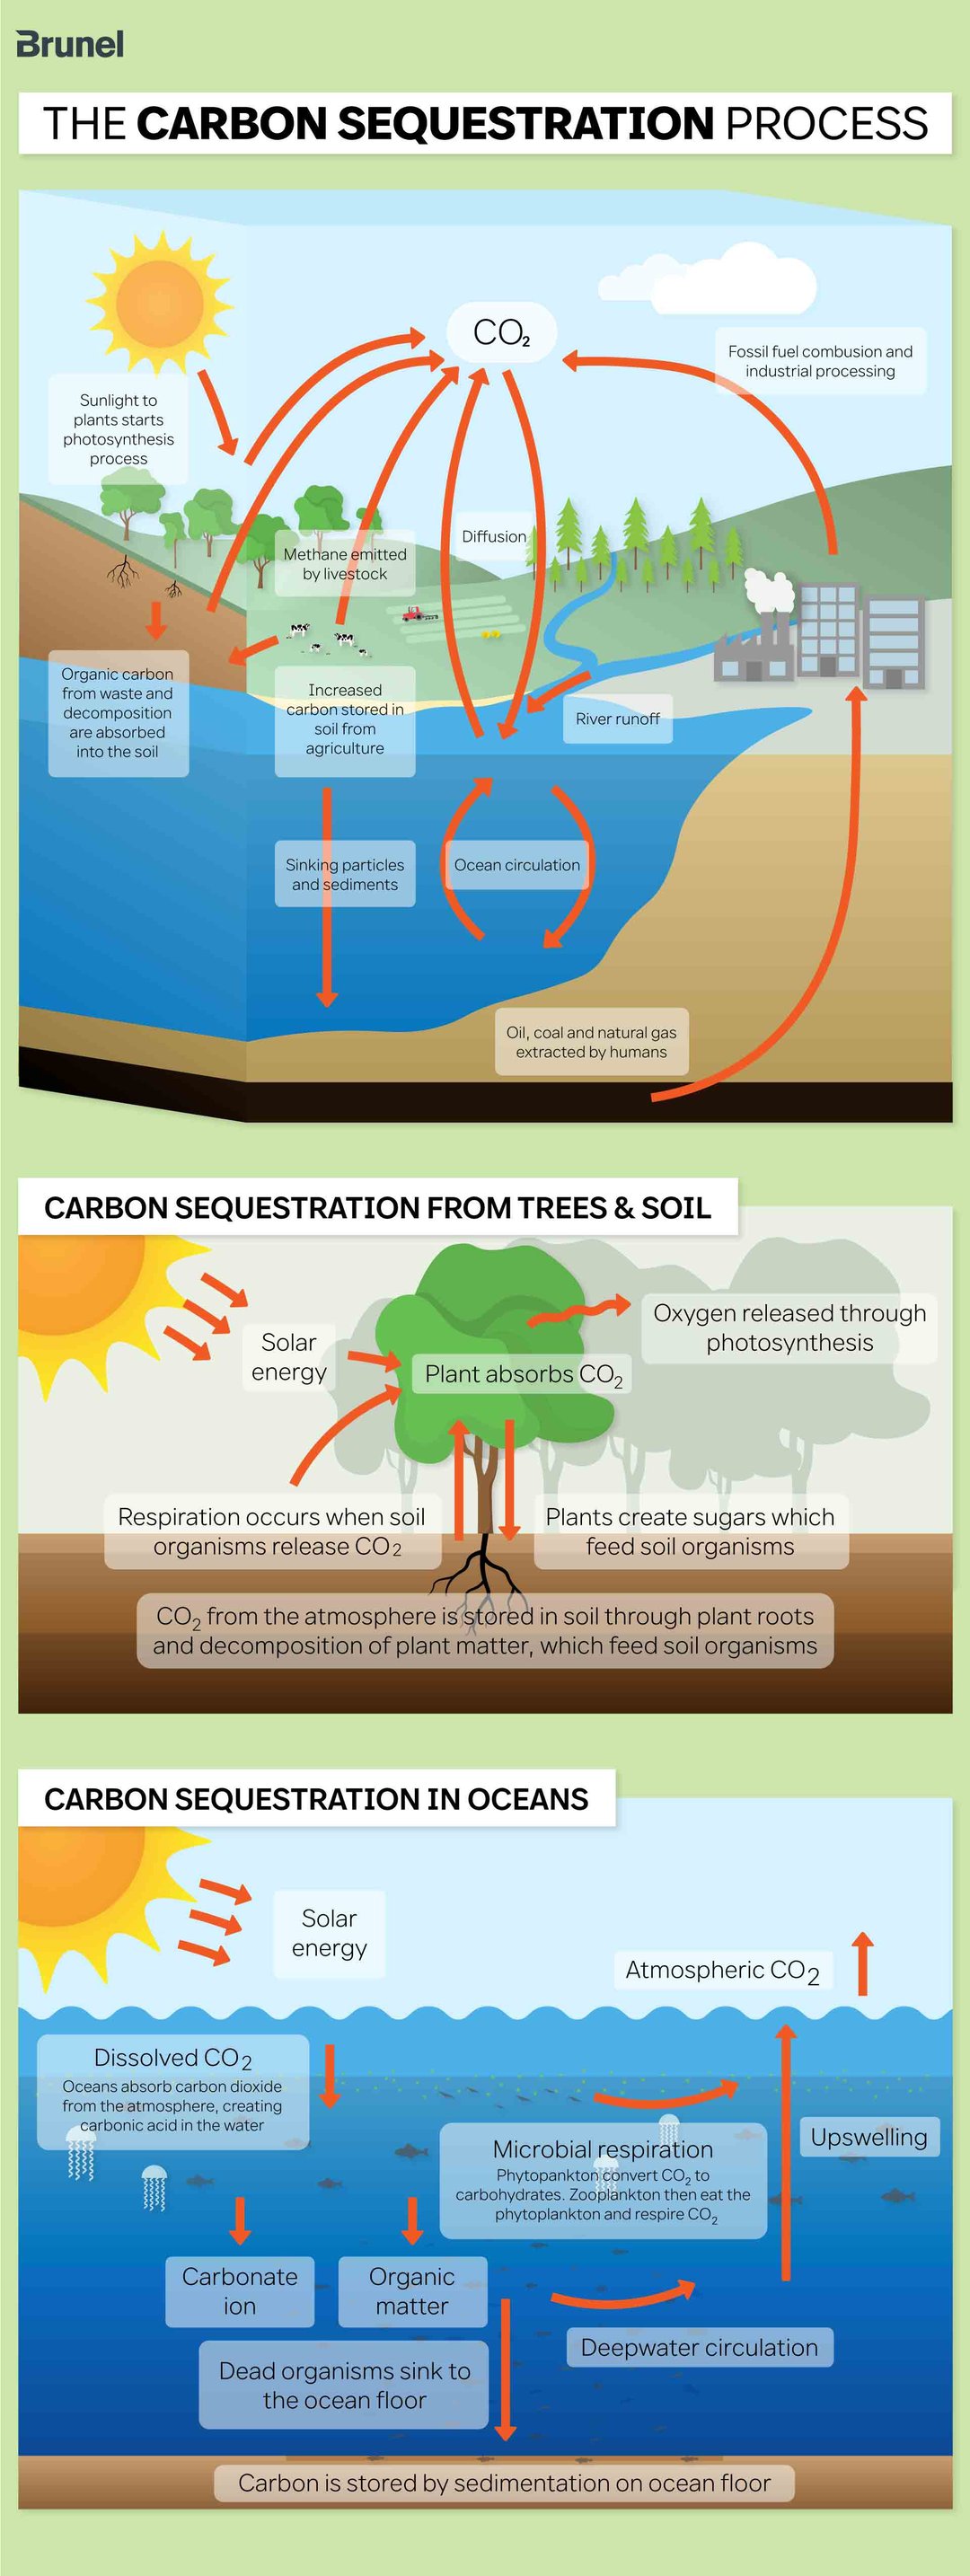 Carbon sequestration process life cycle trees soil and oceans